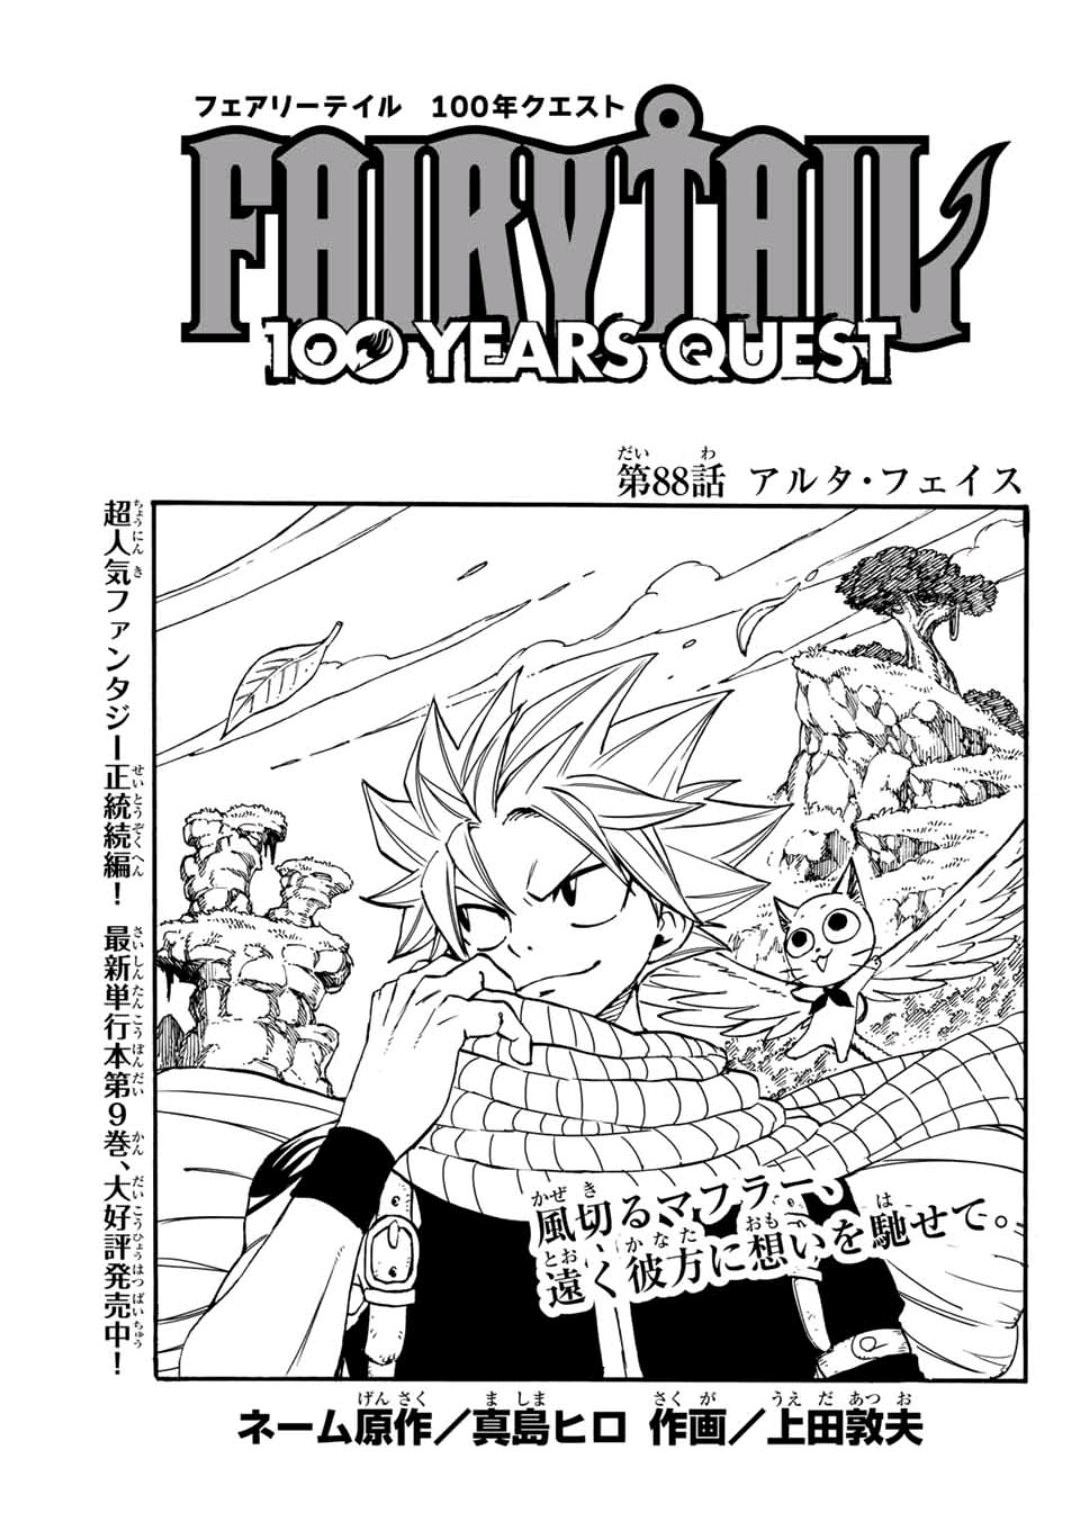 Fairy Tail: 100 Years Quest Chapter 88 | Fairy Tail Wiki | Fandom